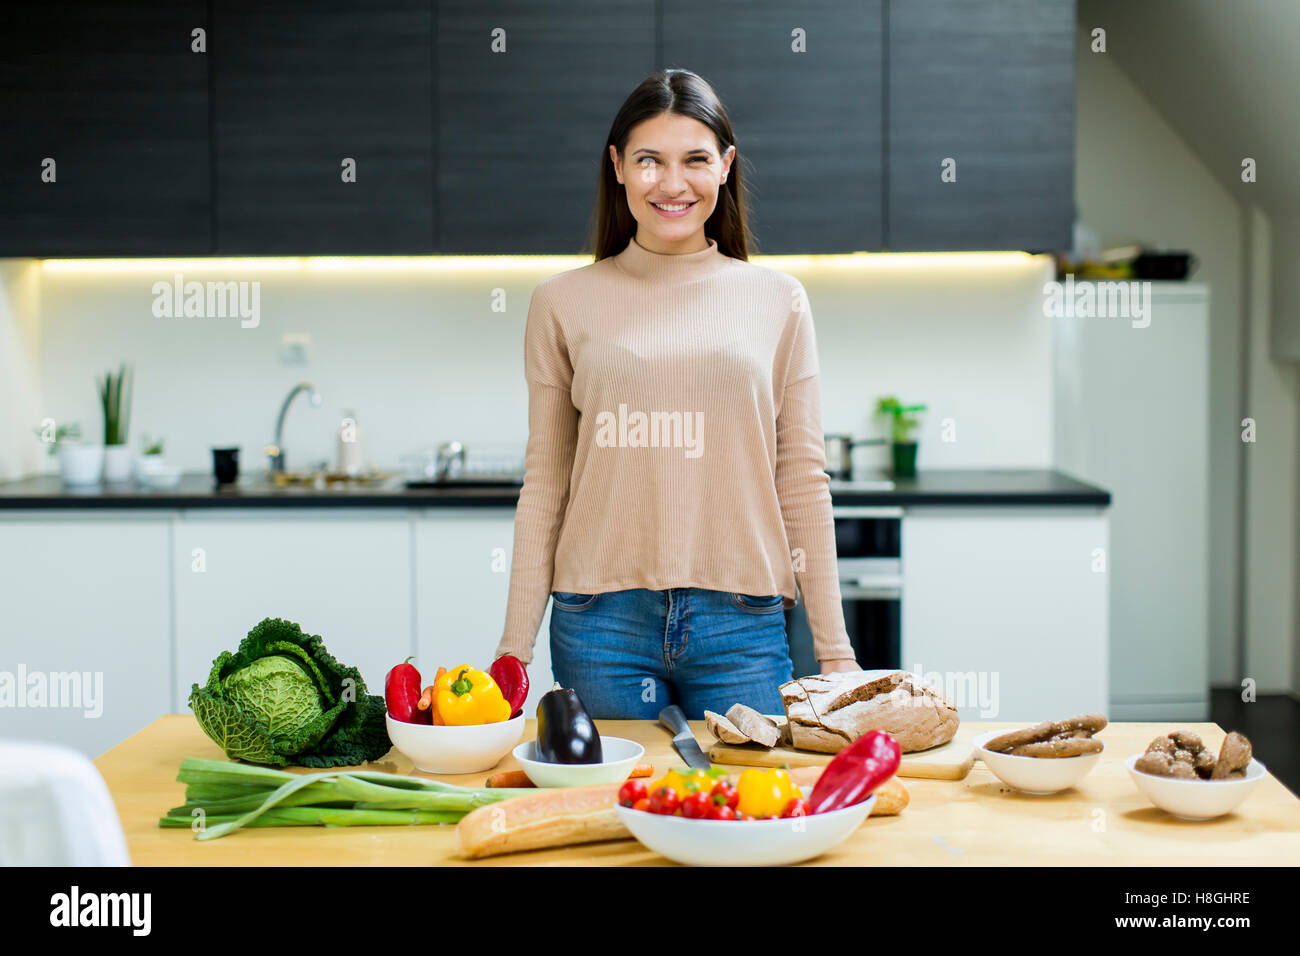 Pretty young woman preparing food in the modern kitchen Stock Photo